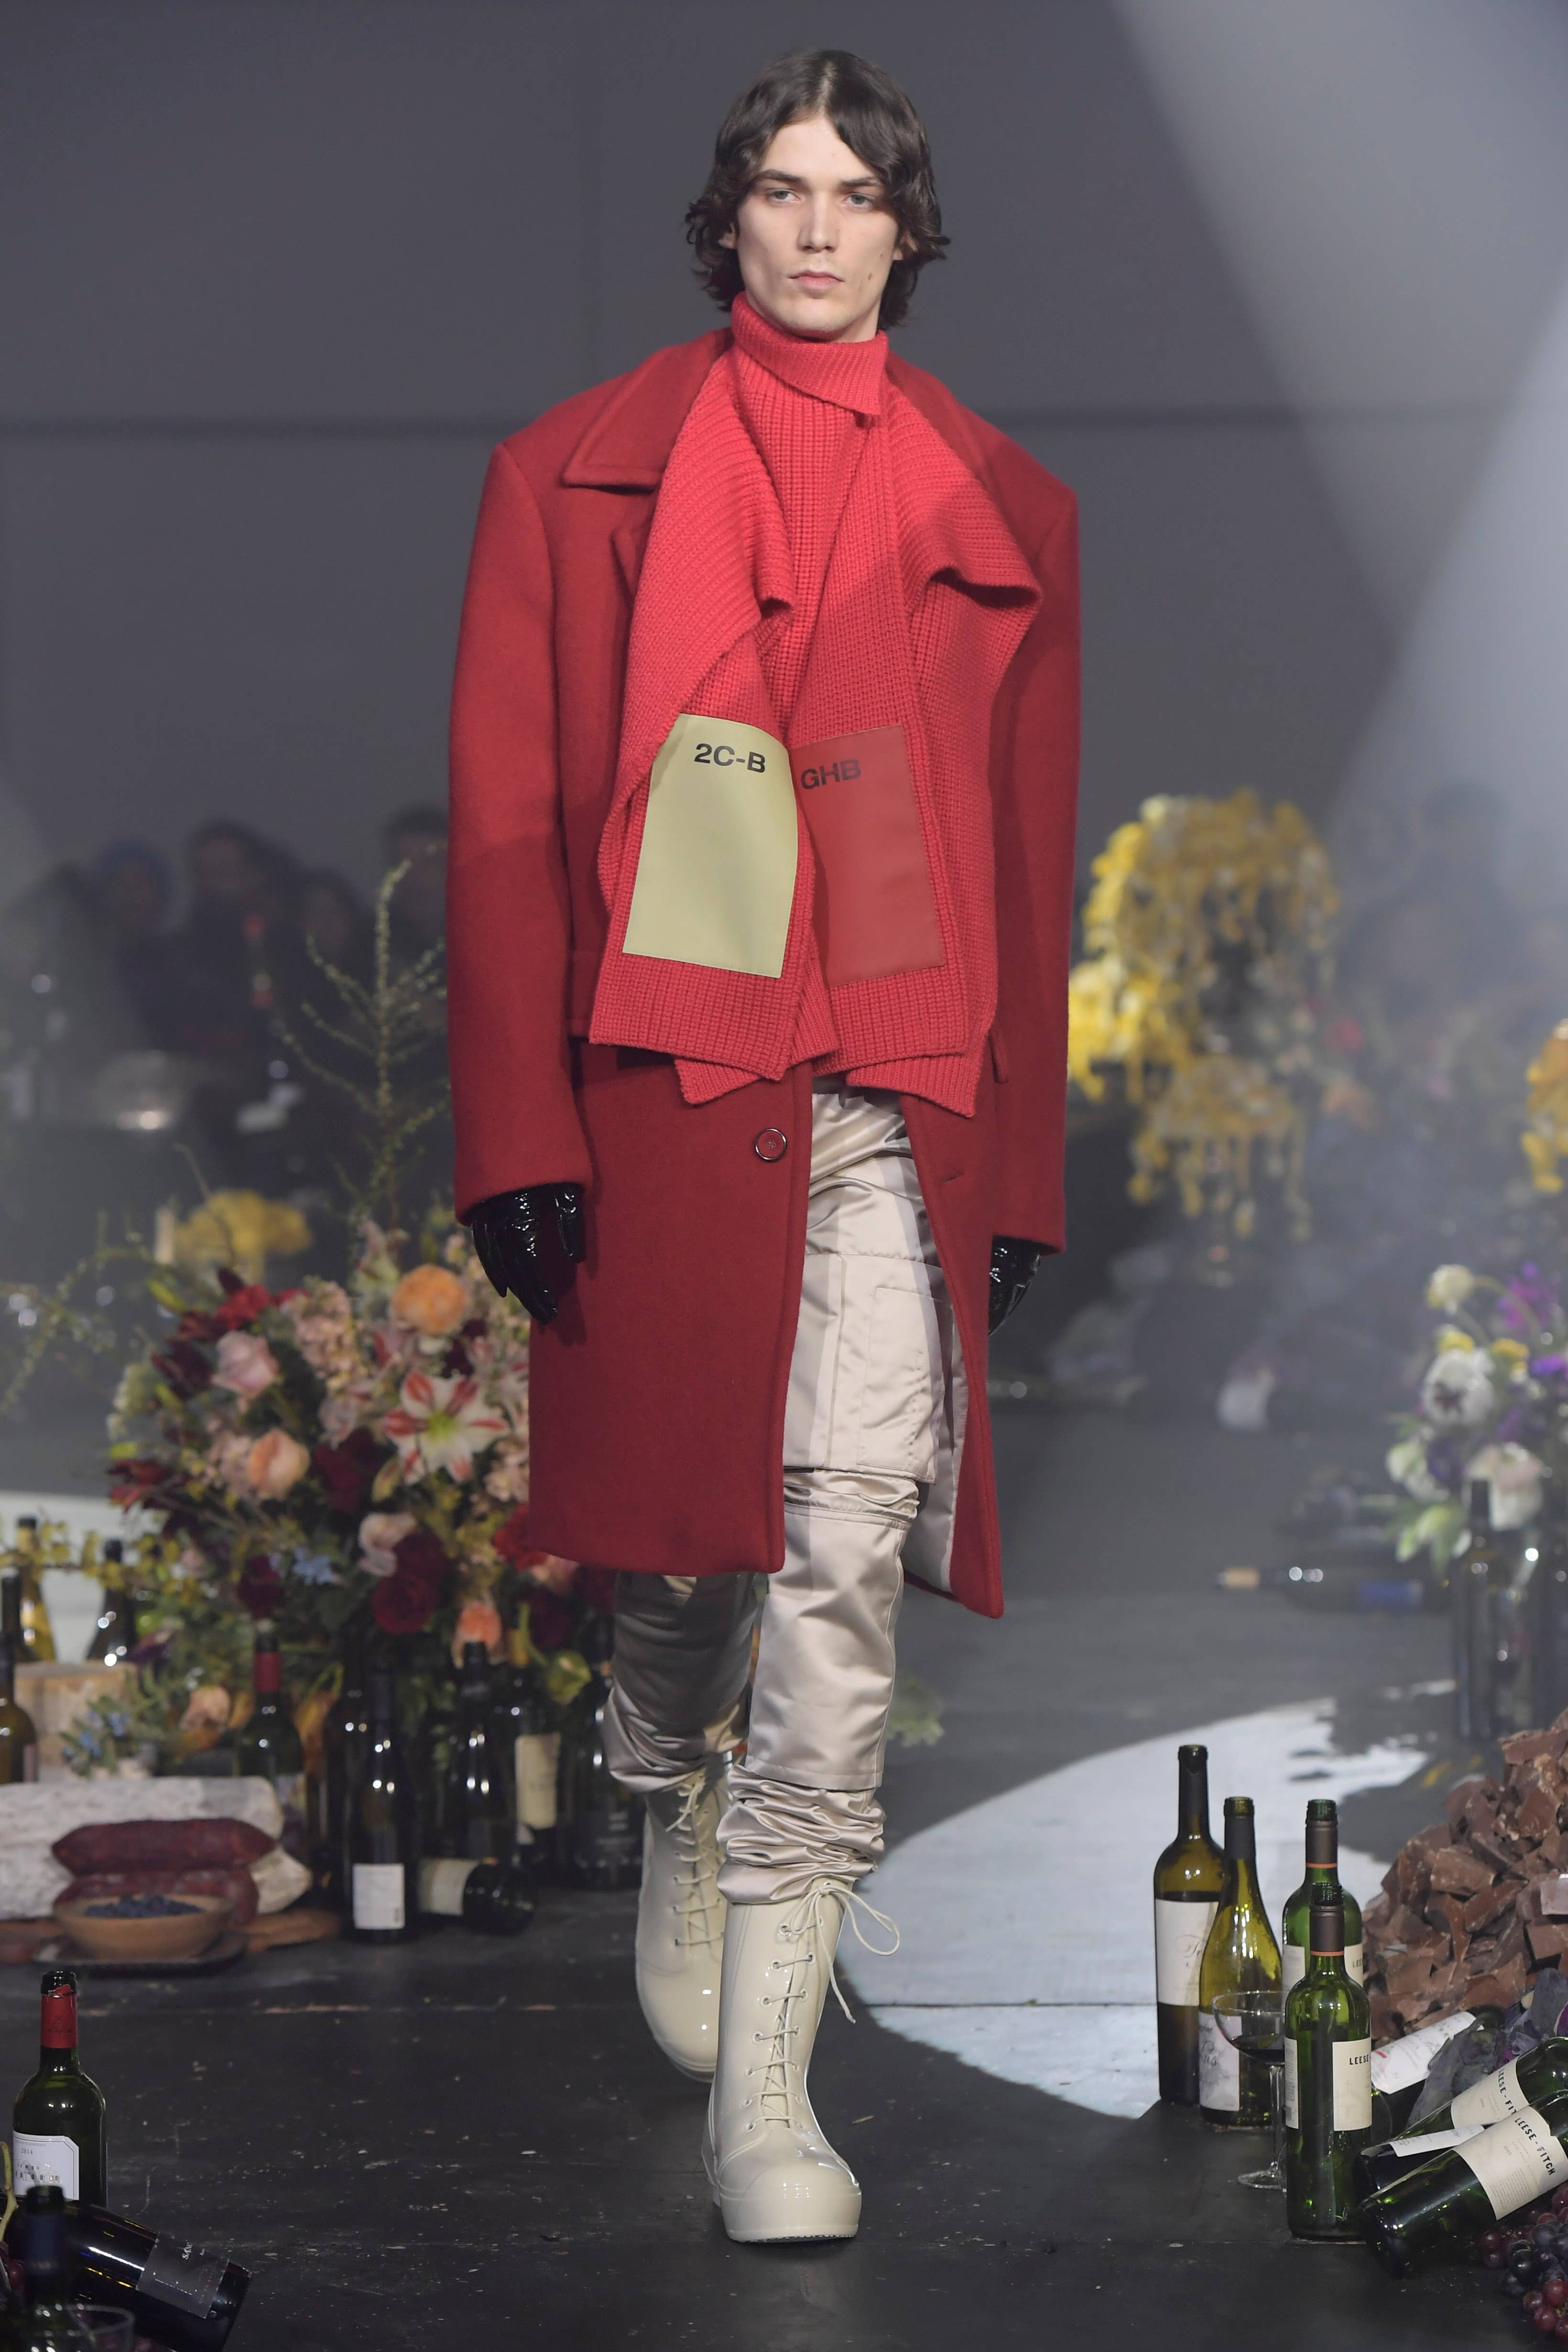 Here's What You Need to Know About Raf Simons' Narcotics-Inspired